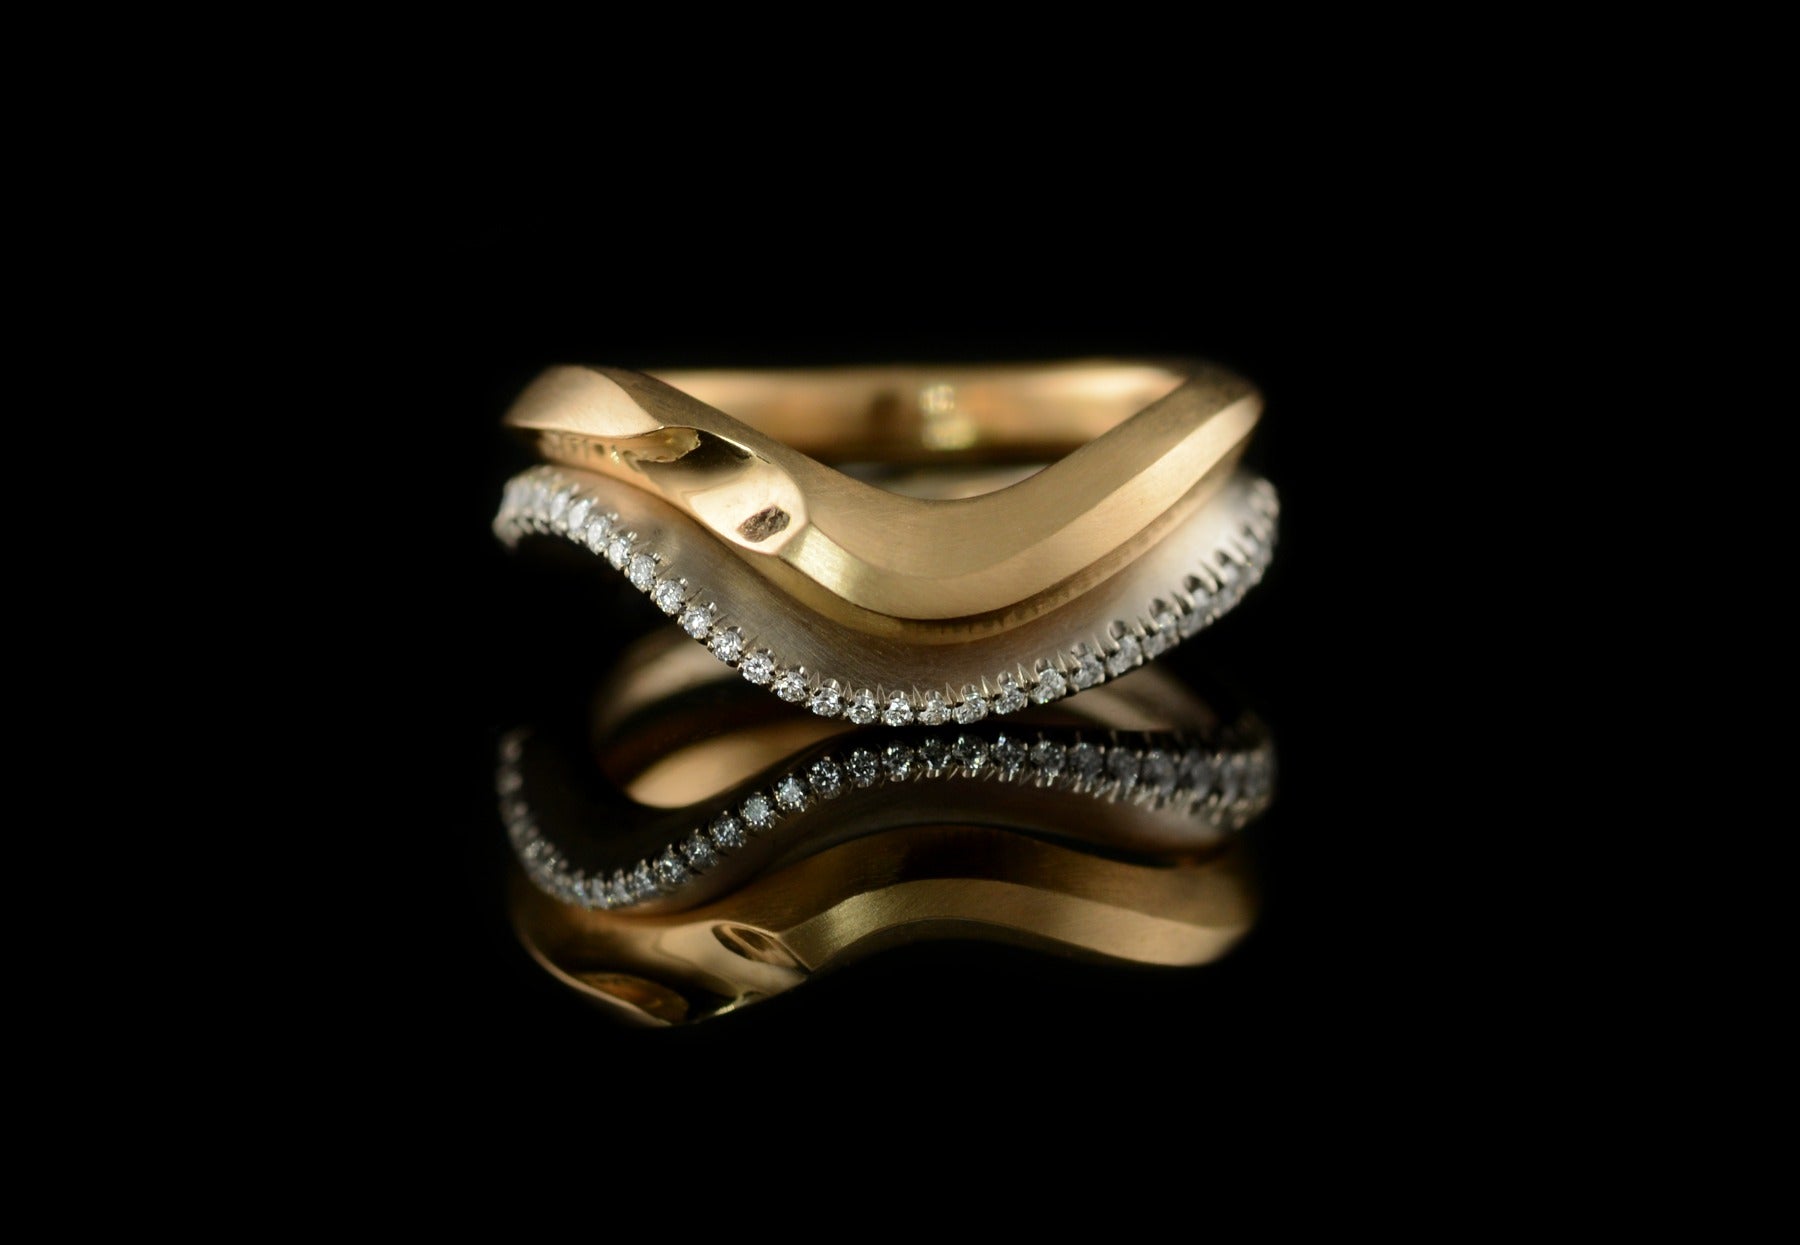 Arris carved yellow gold wedding ring and white gold castelle set white diamond wedding ring